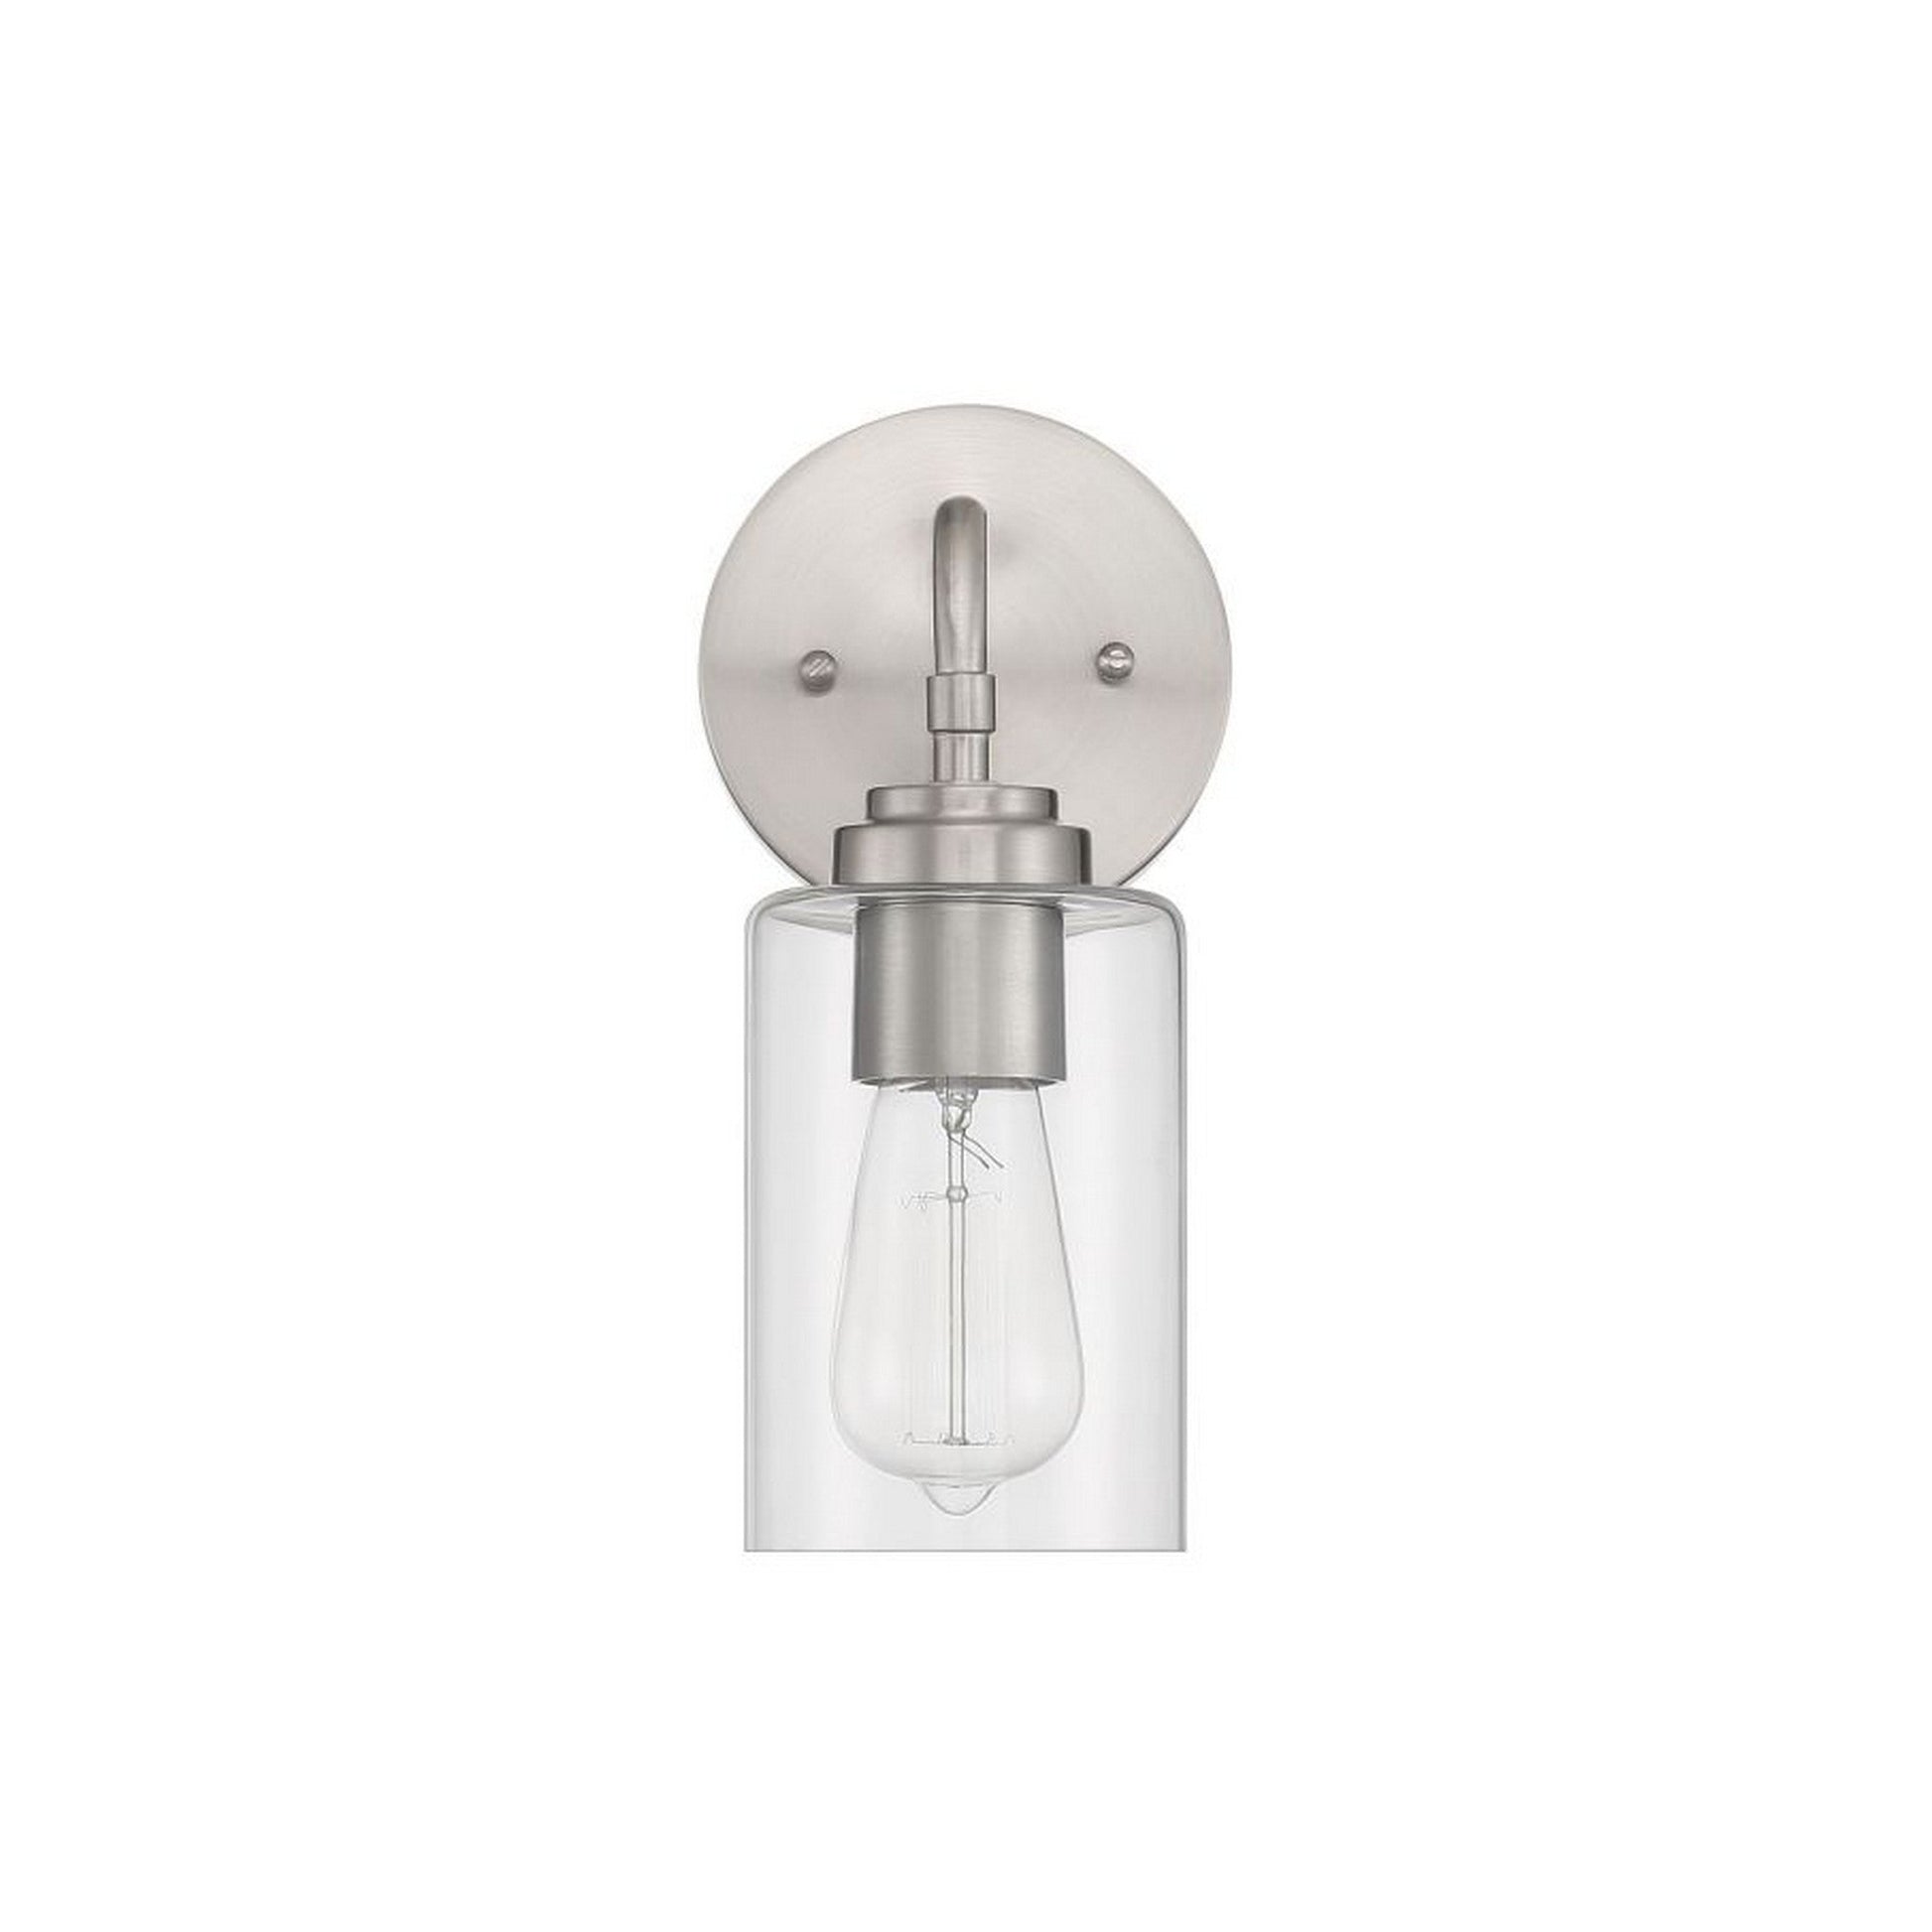 Craftmade Stowe 5" x 11" 1-Light Brushed Polished Nickel Wall Sconce With Clear Glass Shade